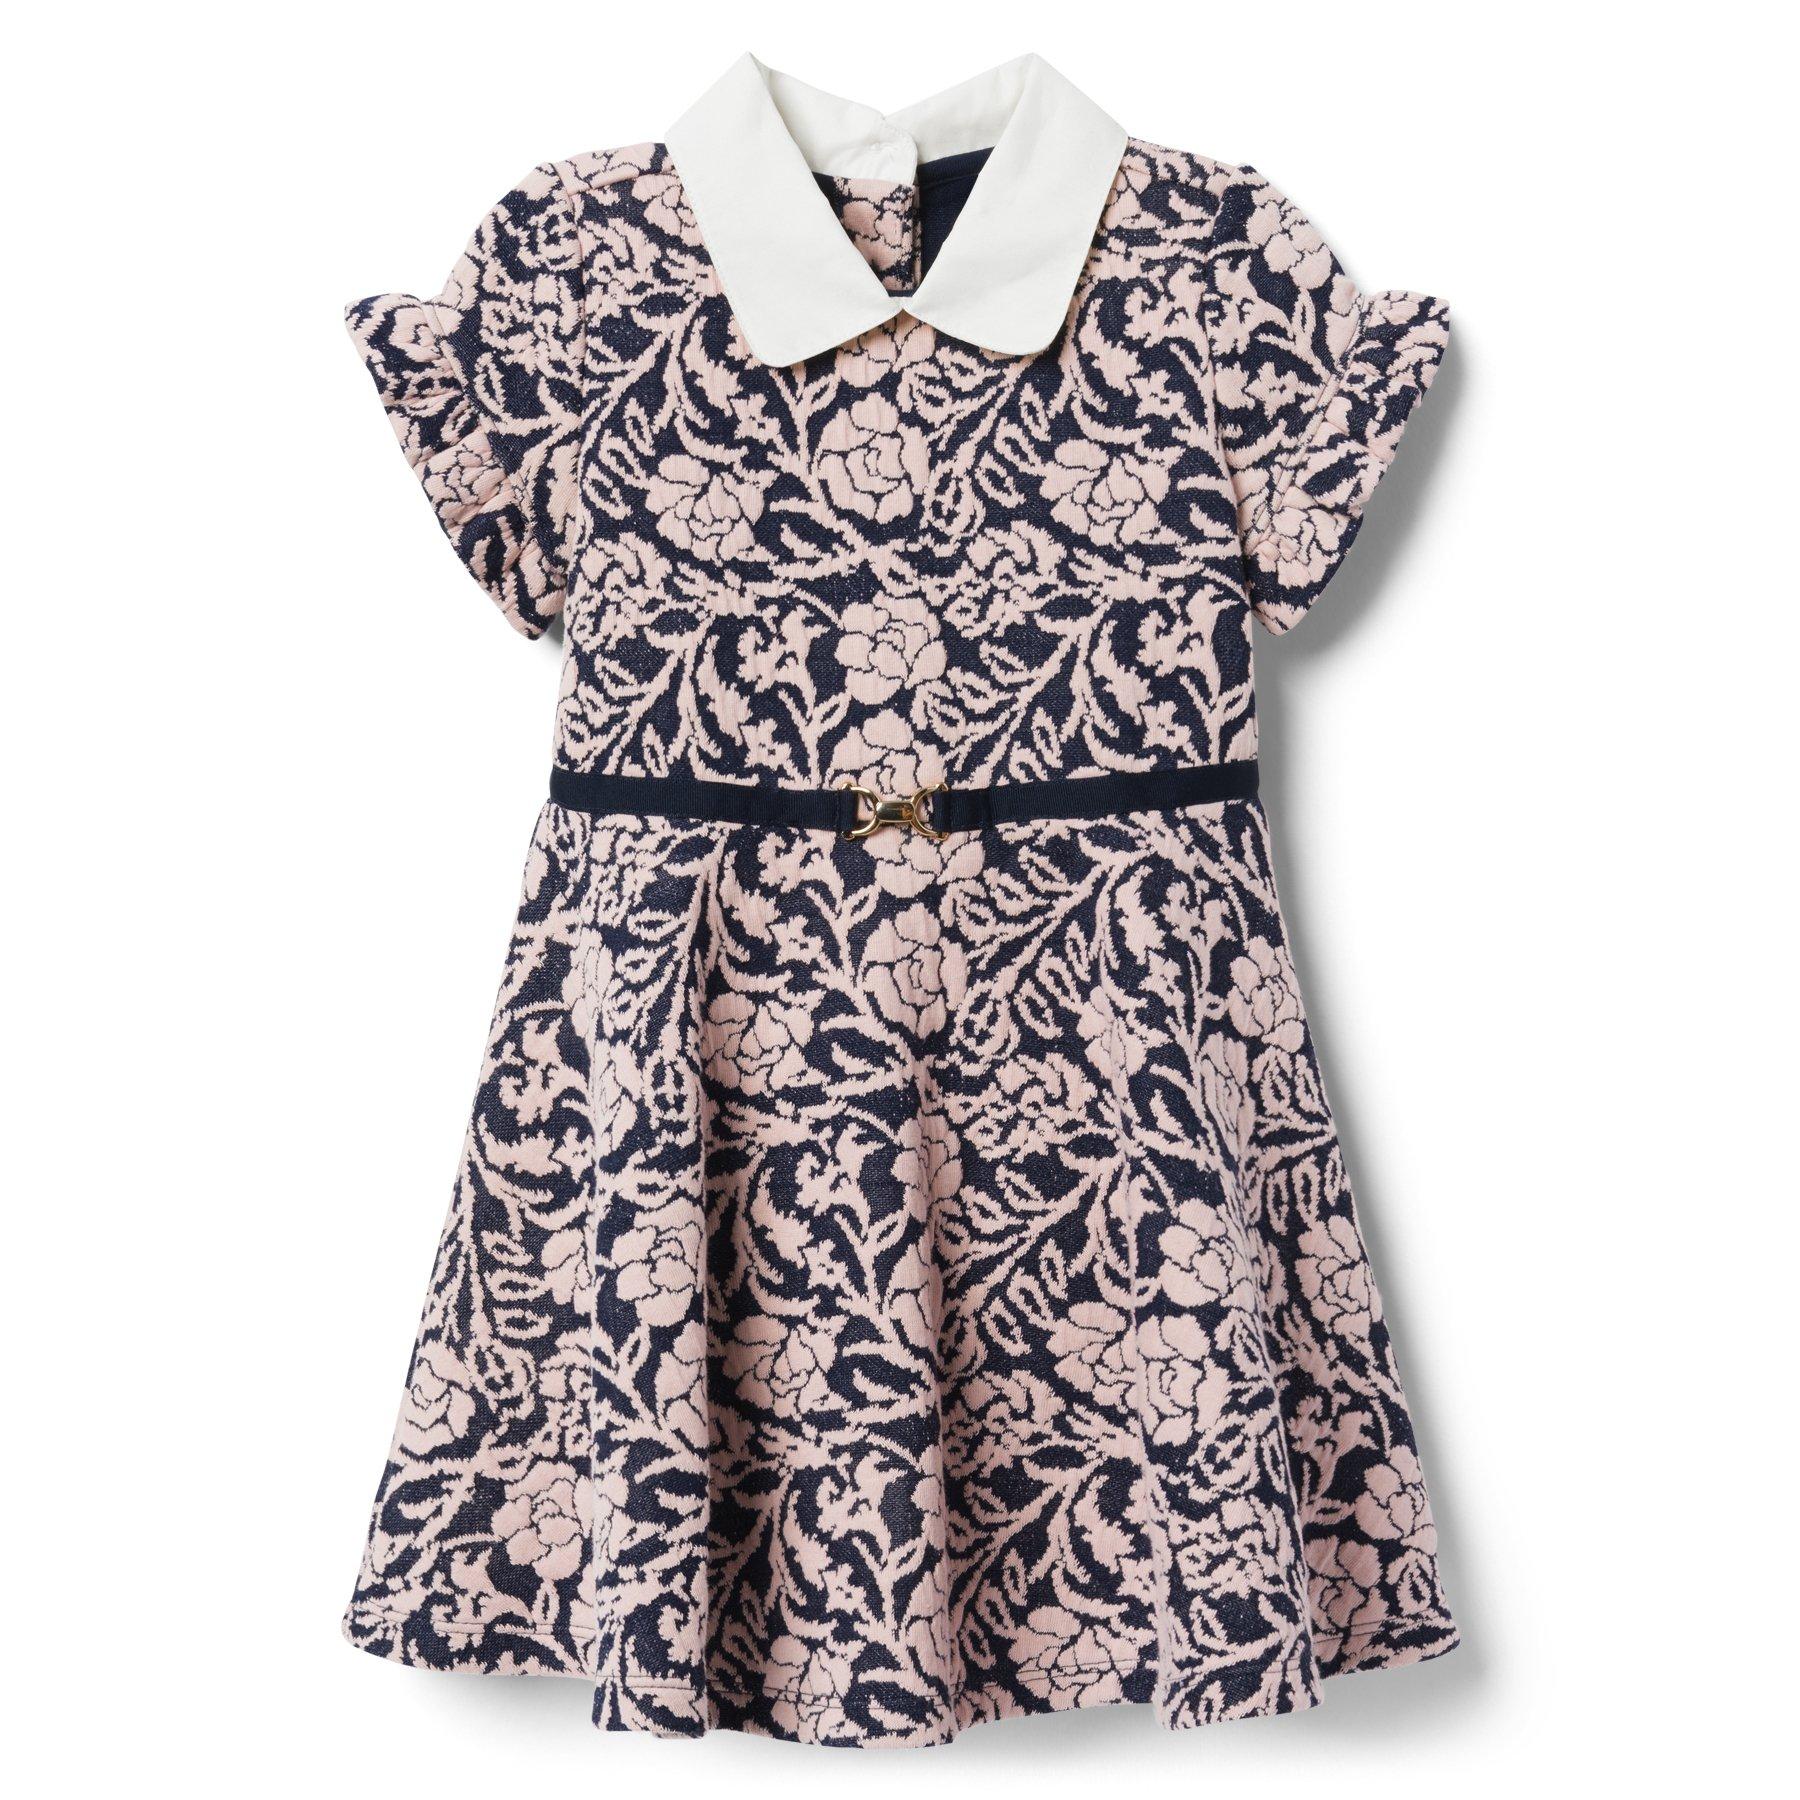 janie and jack floral dress